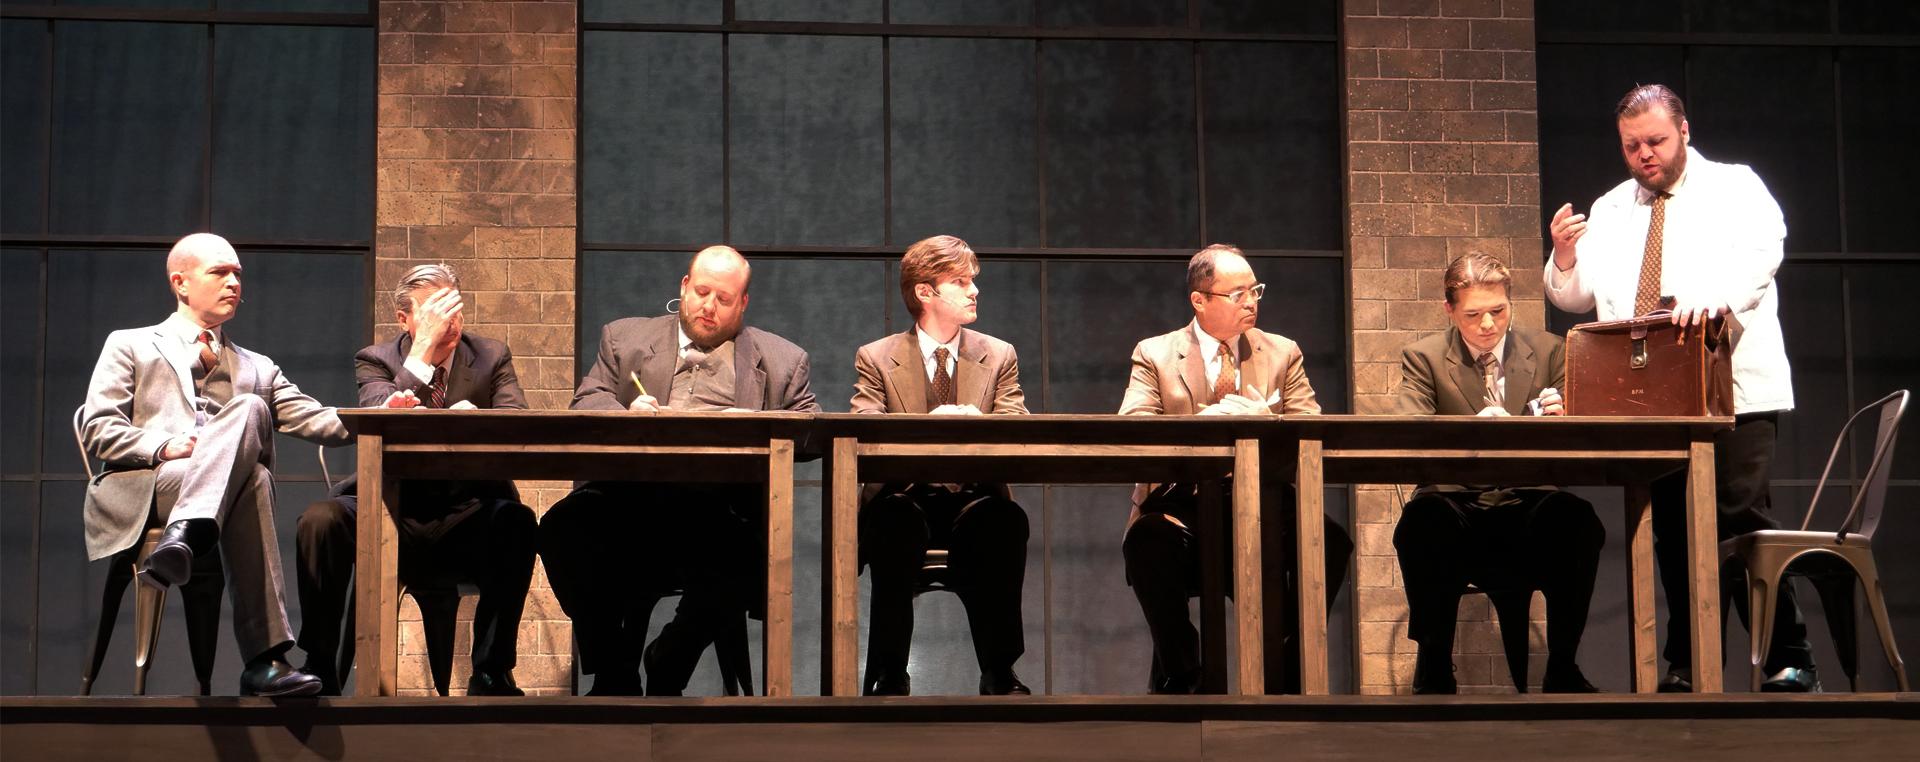 men sitting at a table on stage looking serious